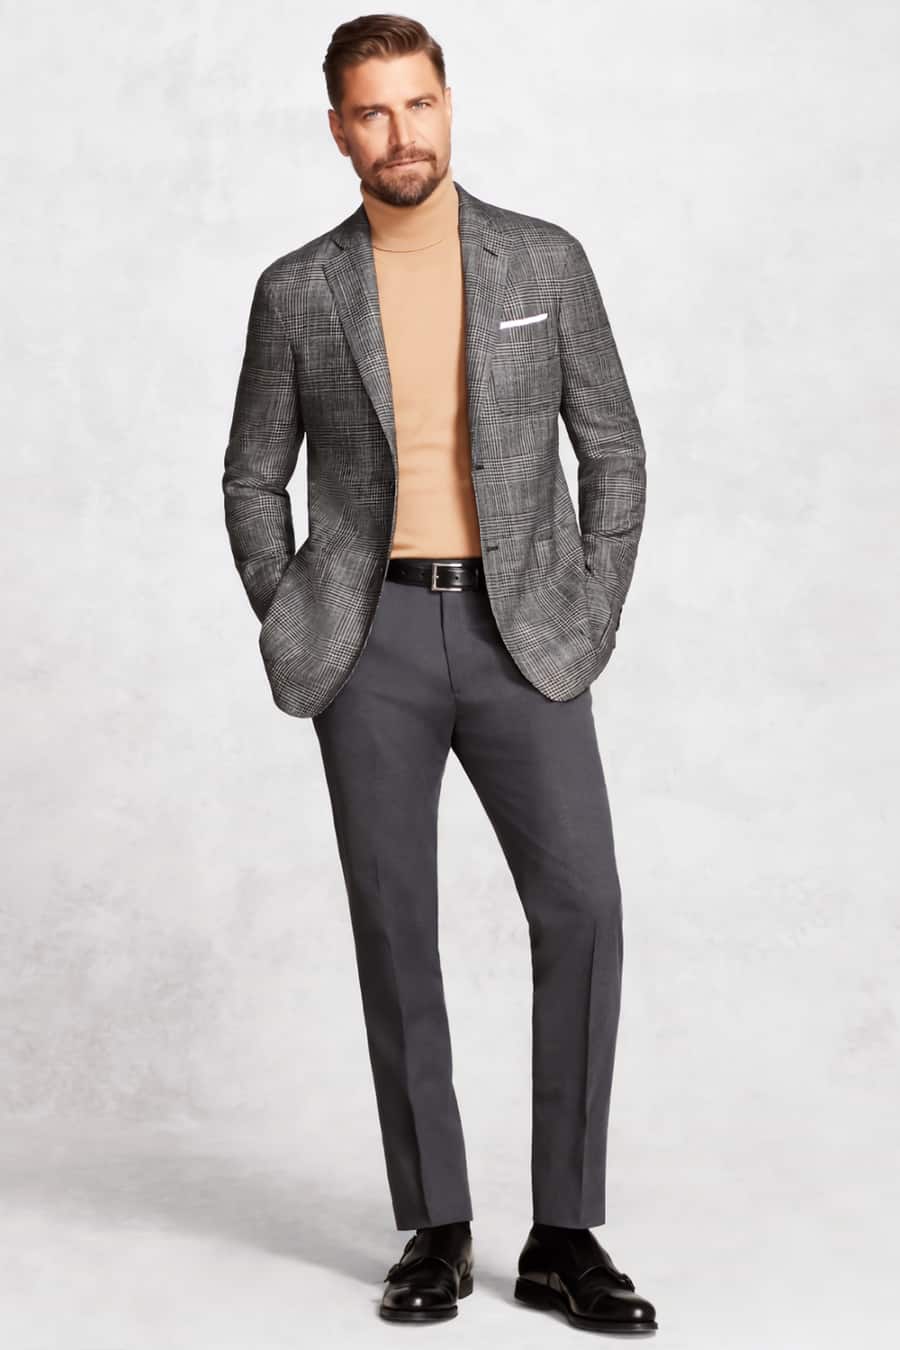 Men's charcoal trousers and light grey blazer suit separates outfit